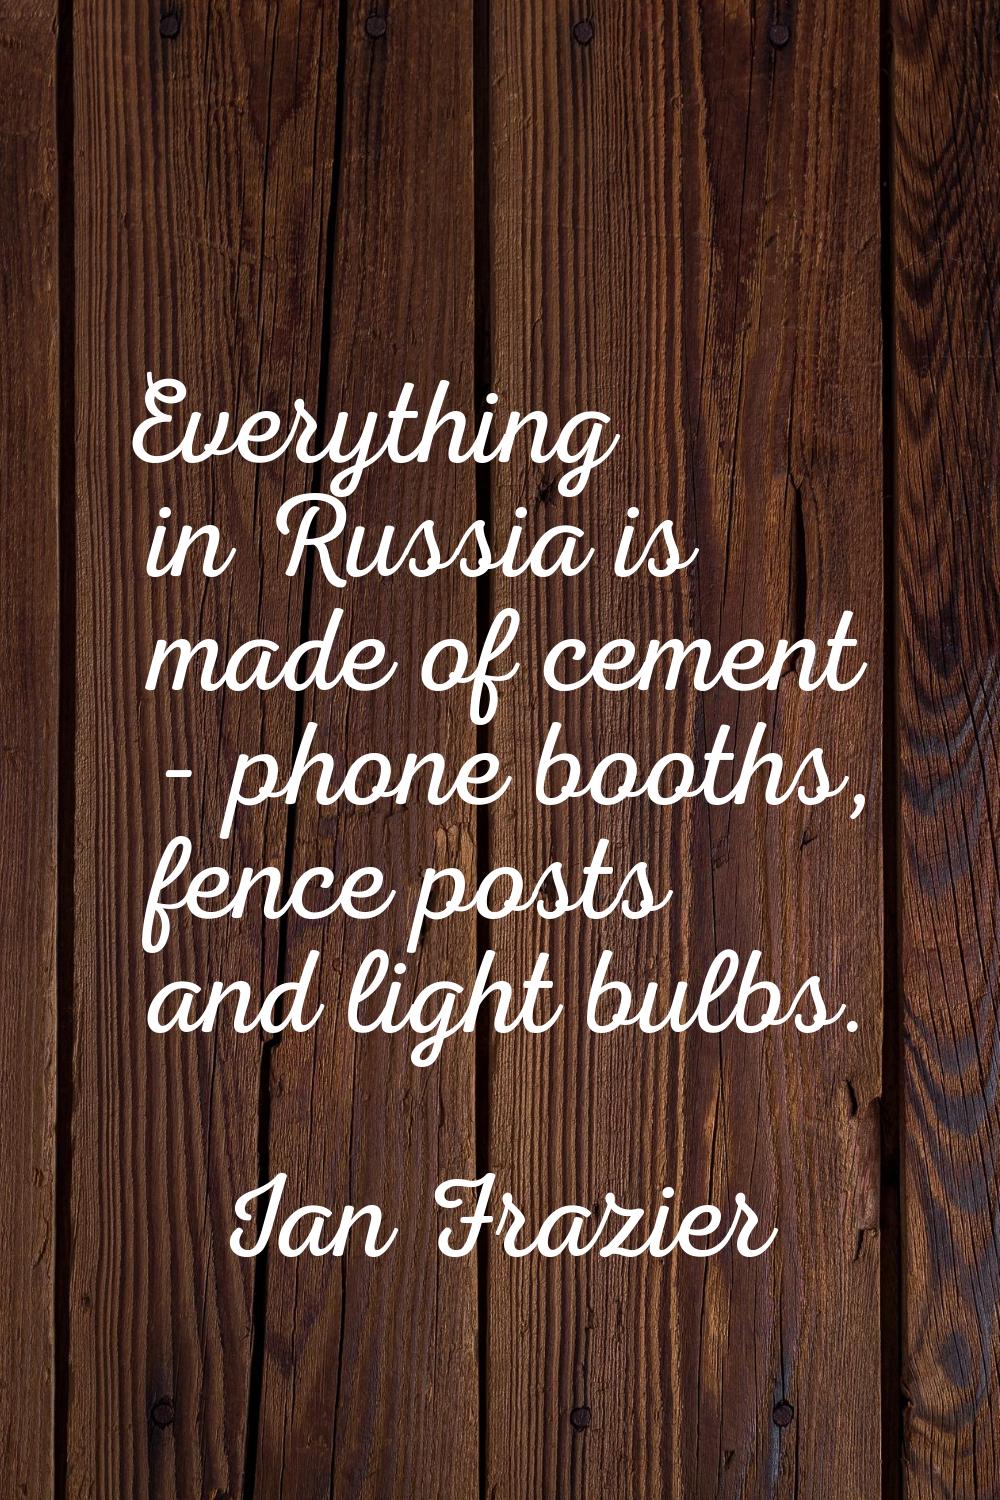 Everything in Russia is made of cement - phone booths, fence posts and light bulbs.